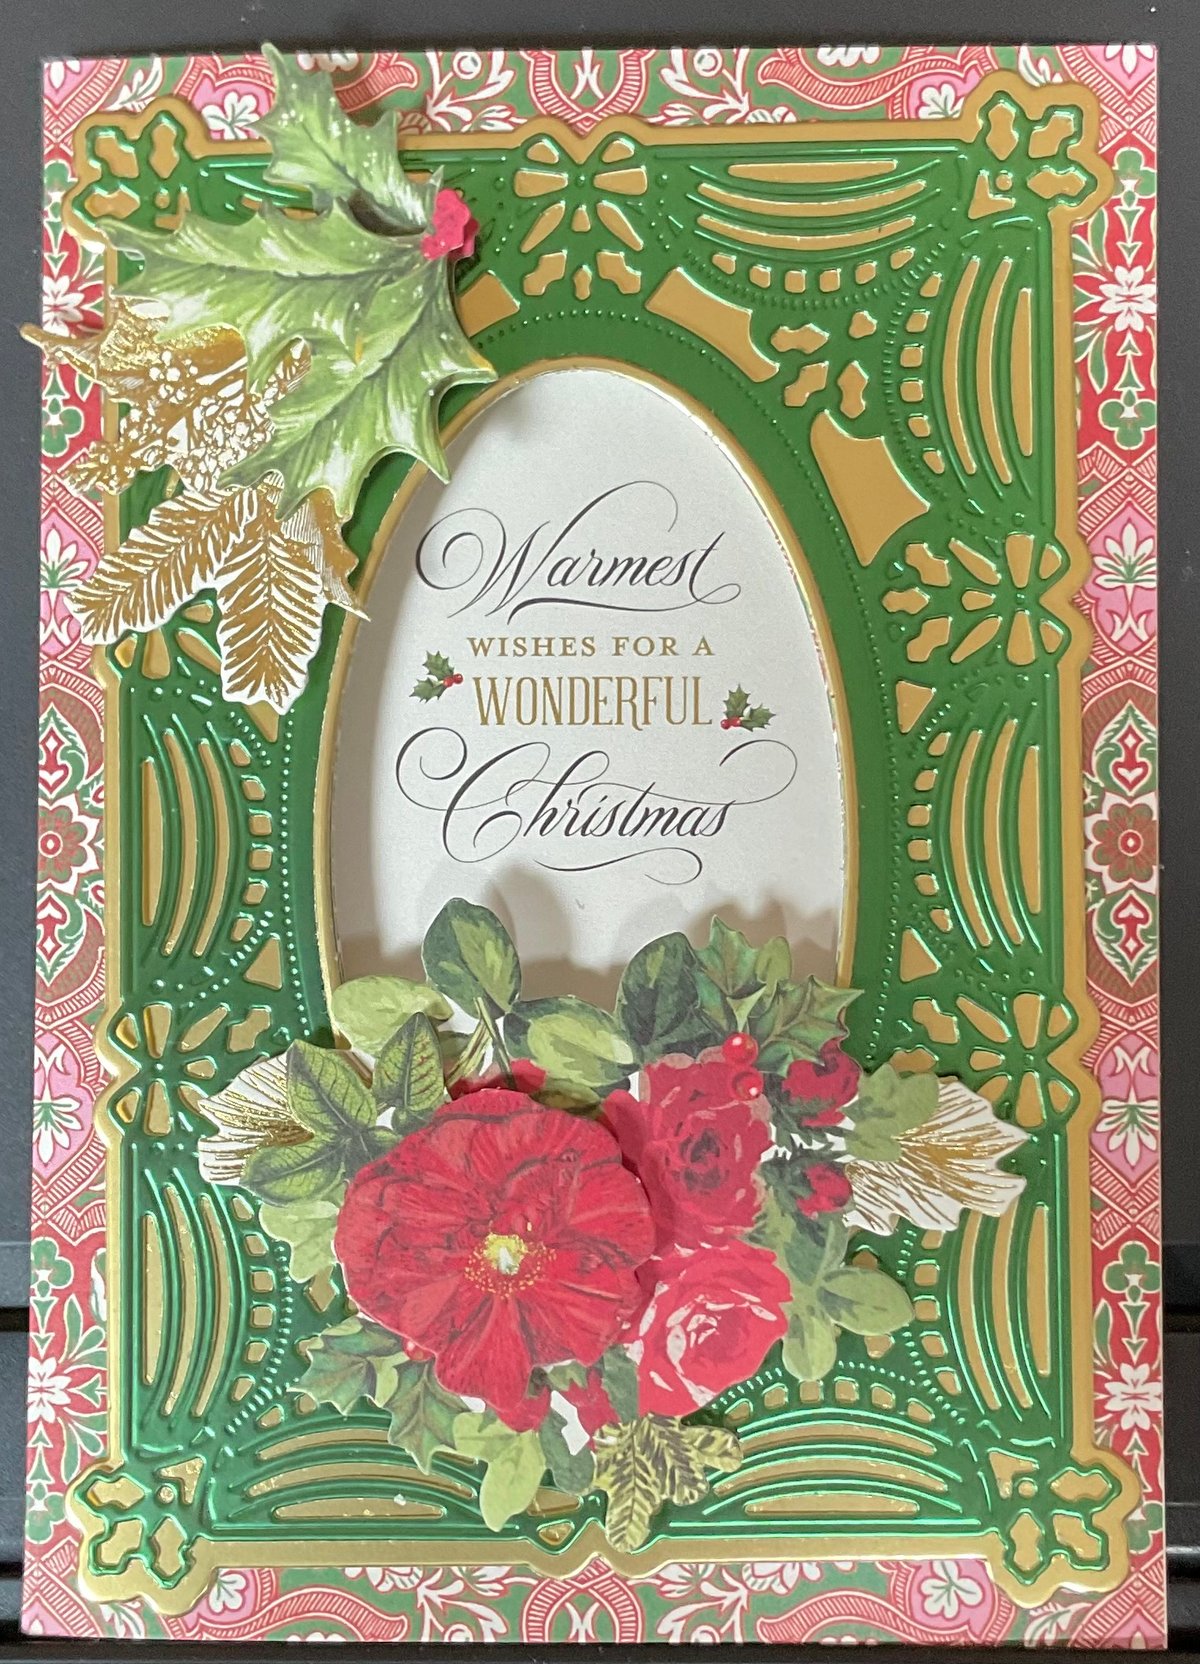 A christmas card with red roses and green leaves.